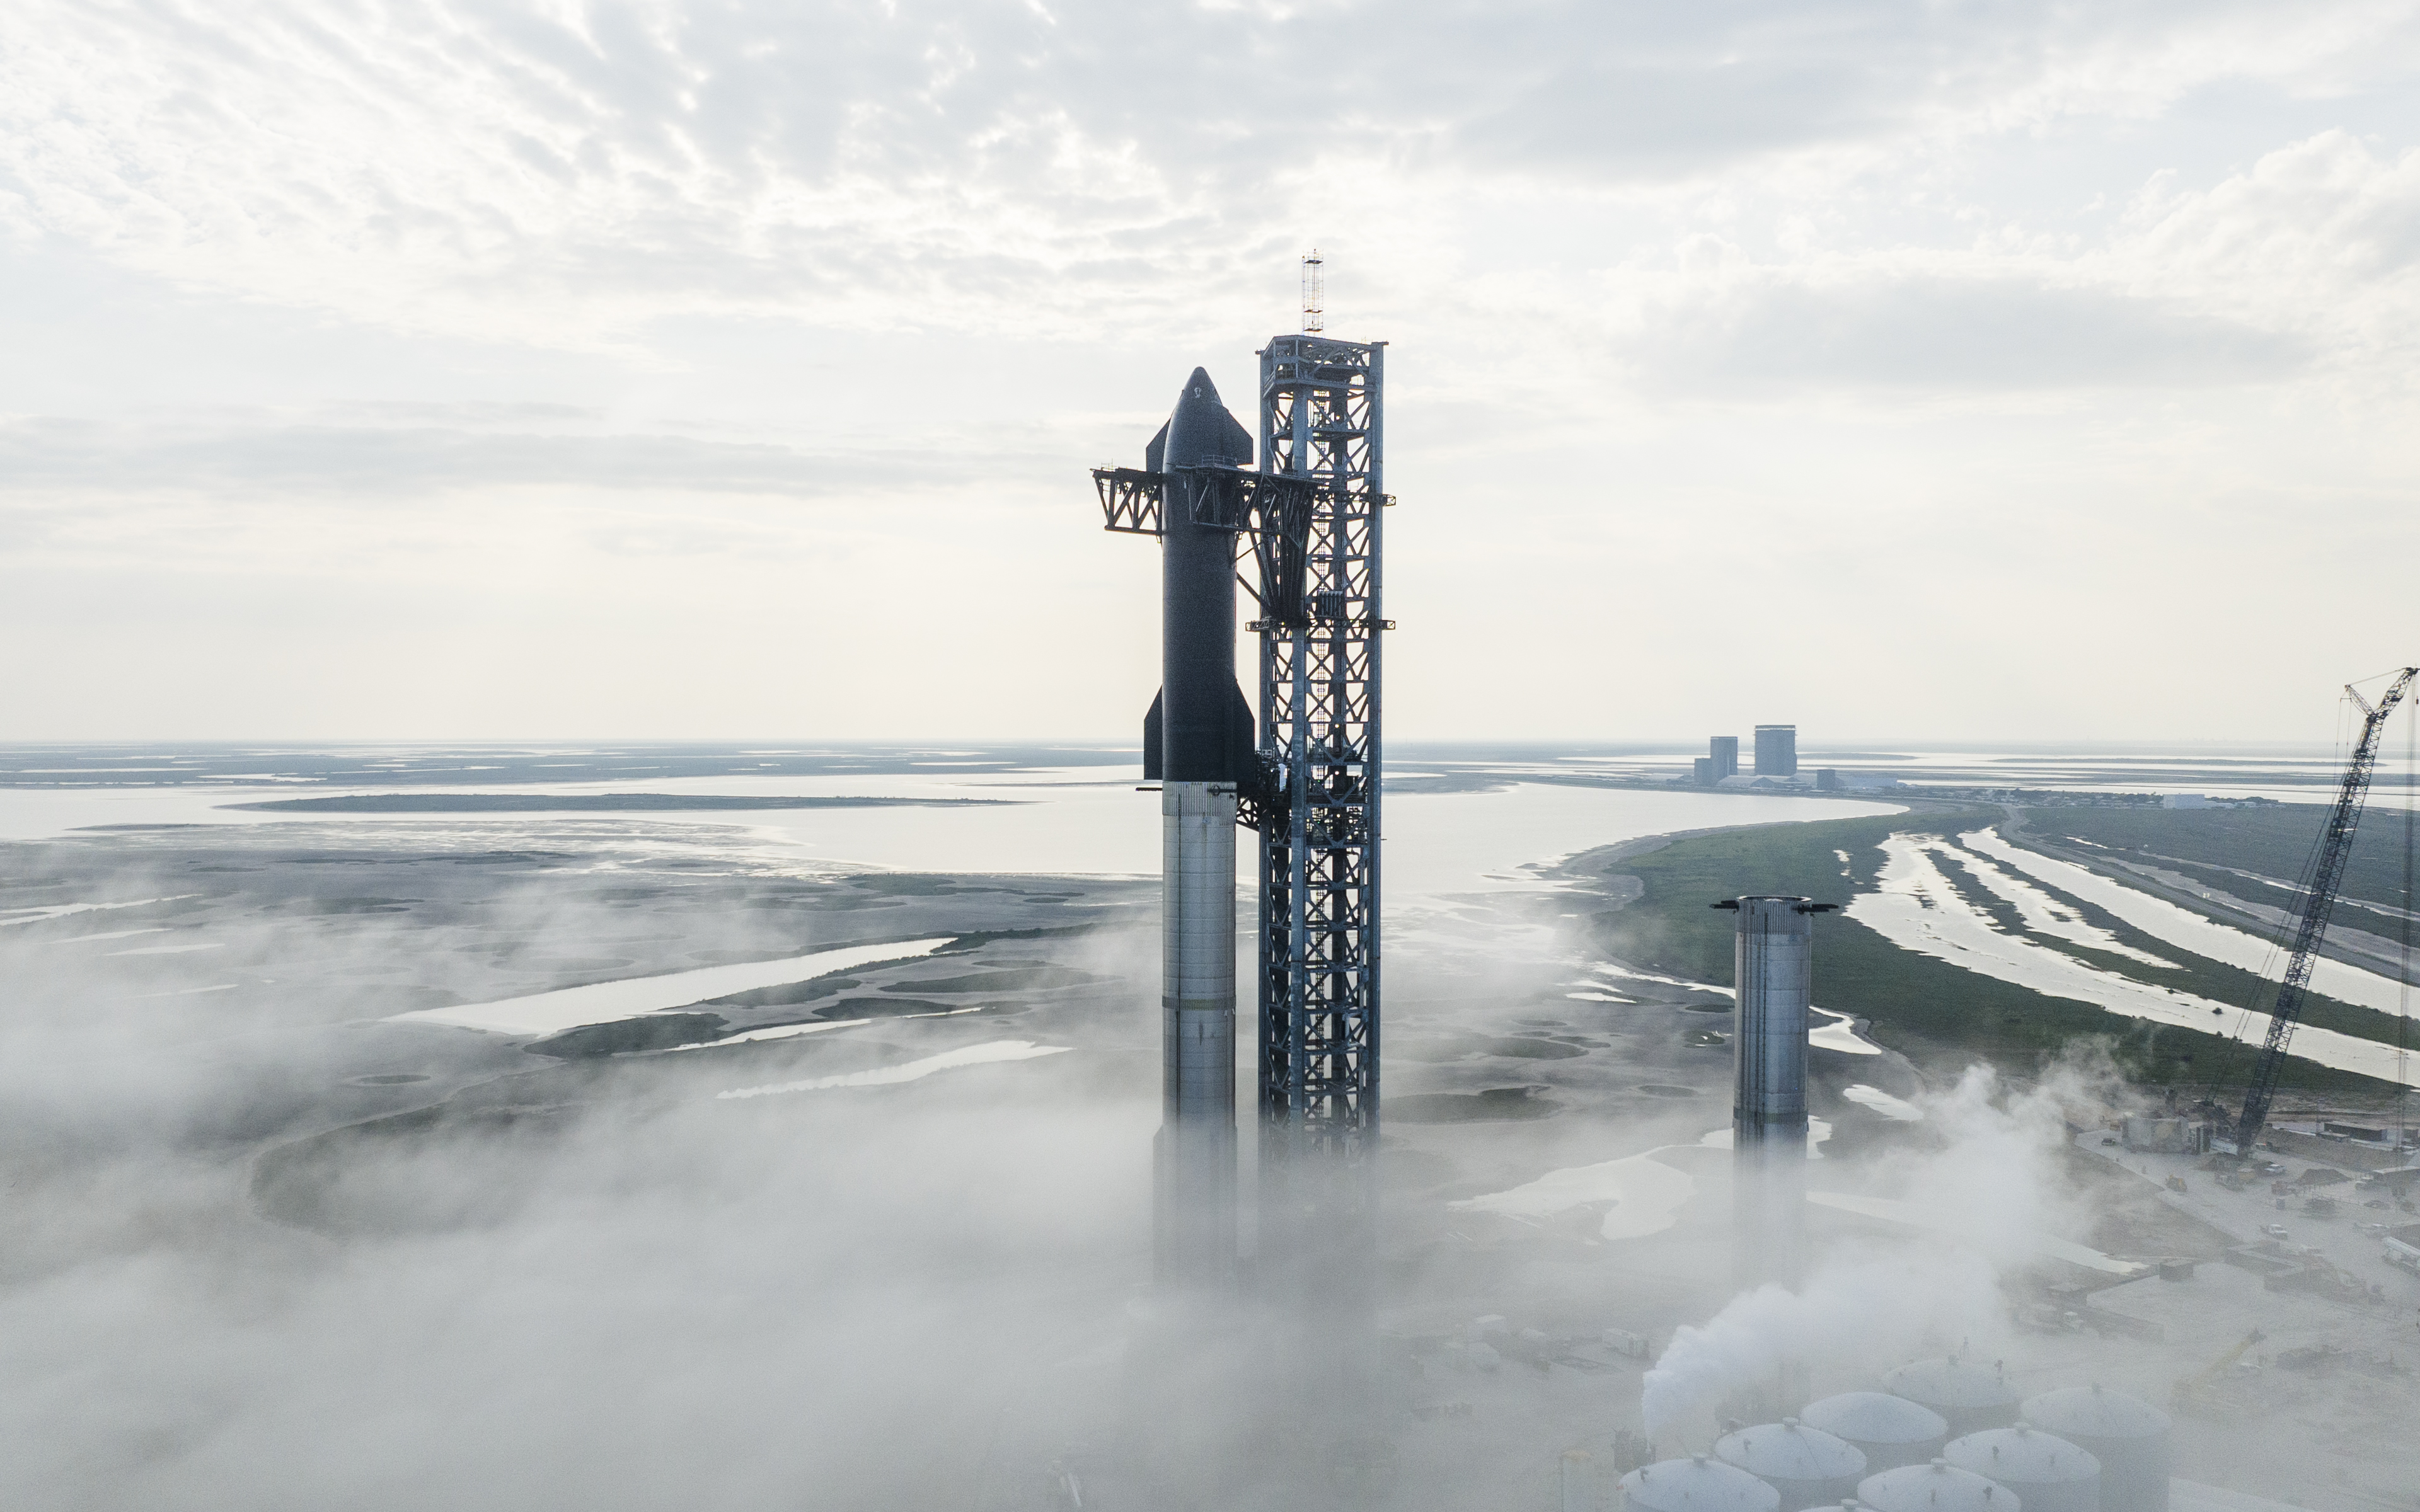 SpaceX prepares to launch its first-ever Starship and Super Heavy rocket in March